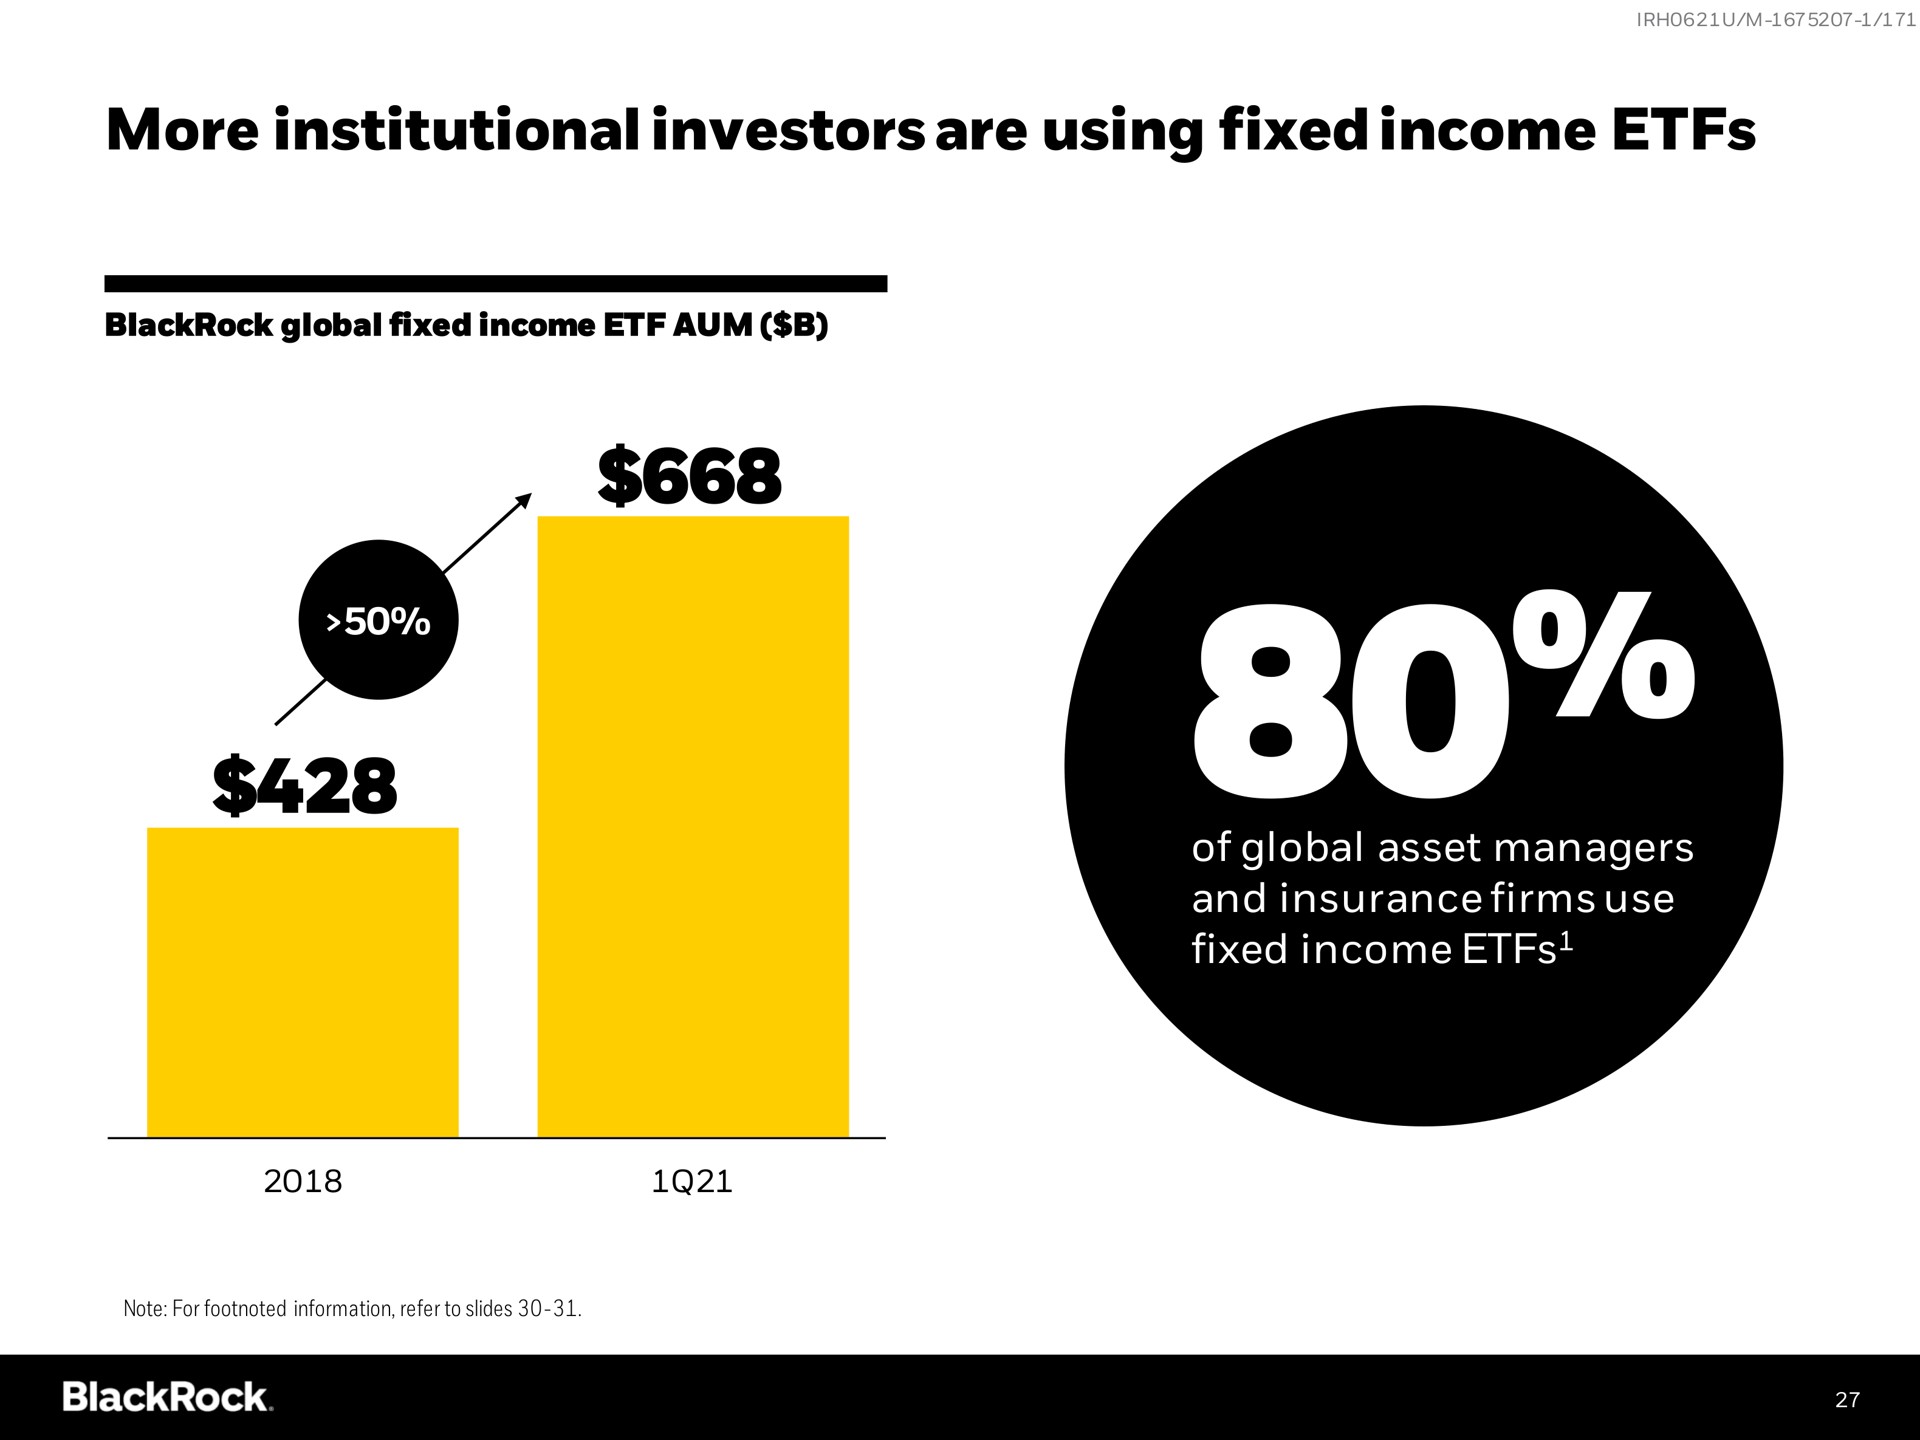 more institutional investors are using fixed income ors | BlackRock